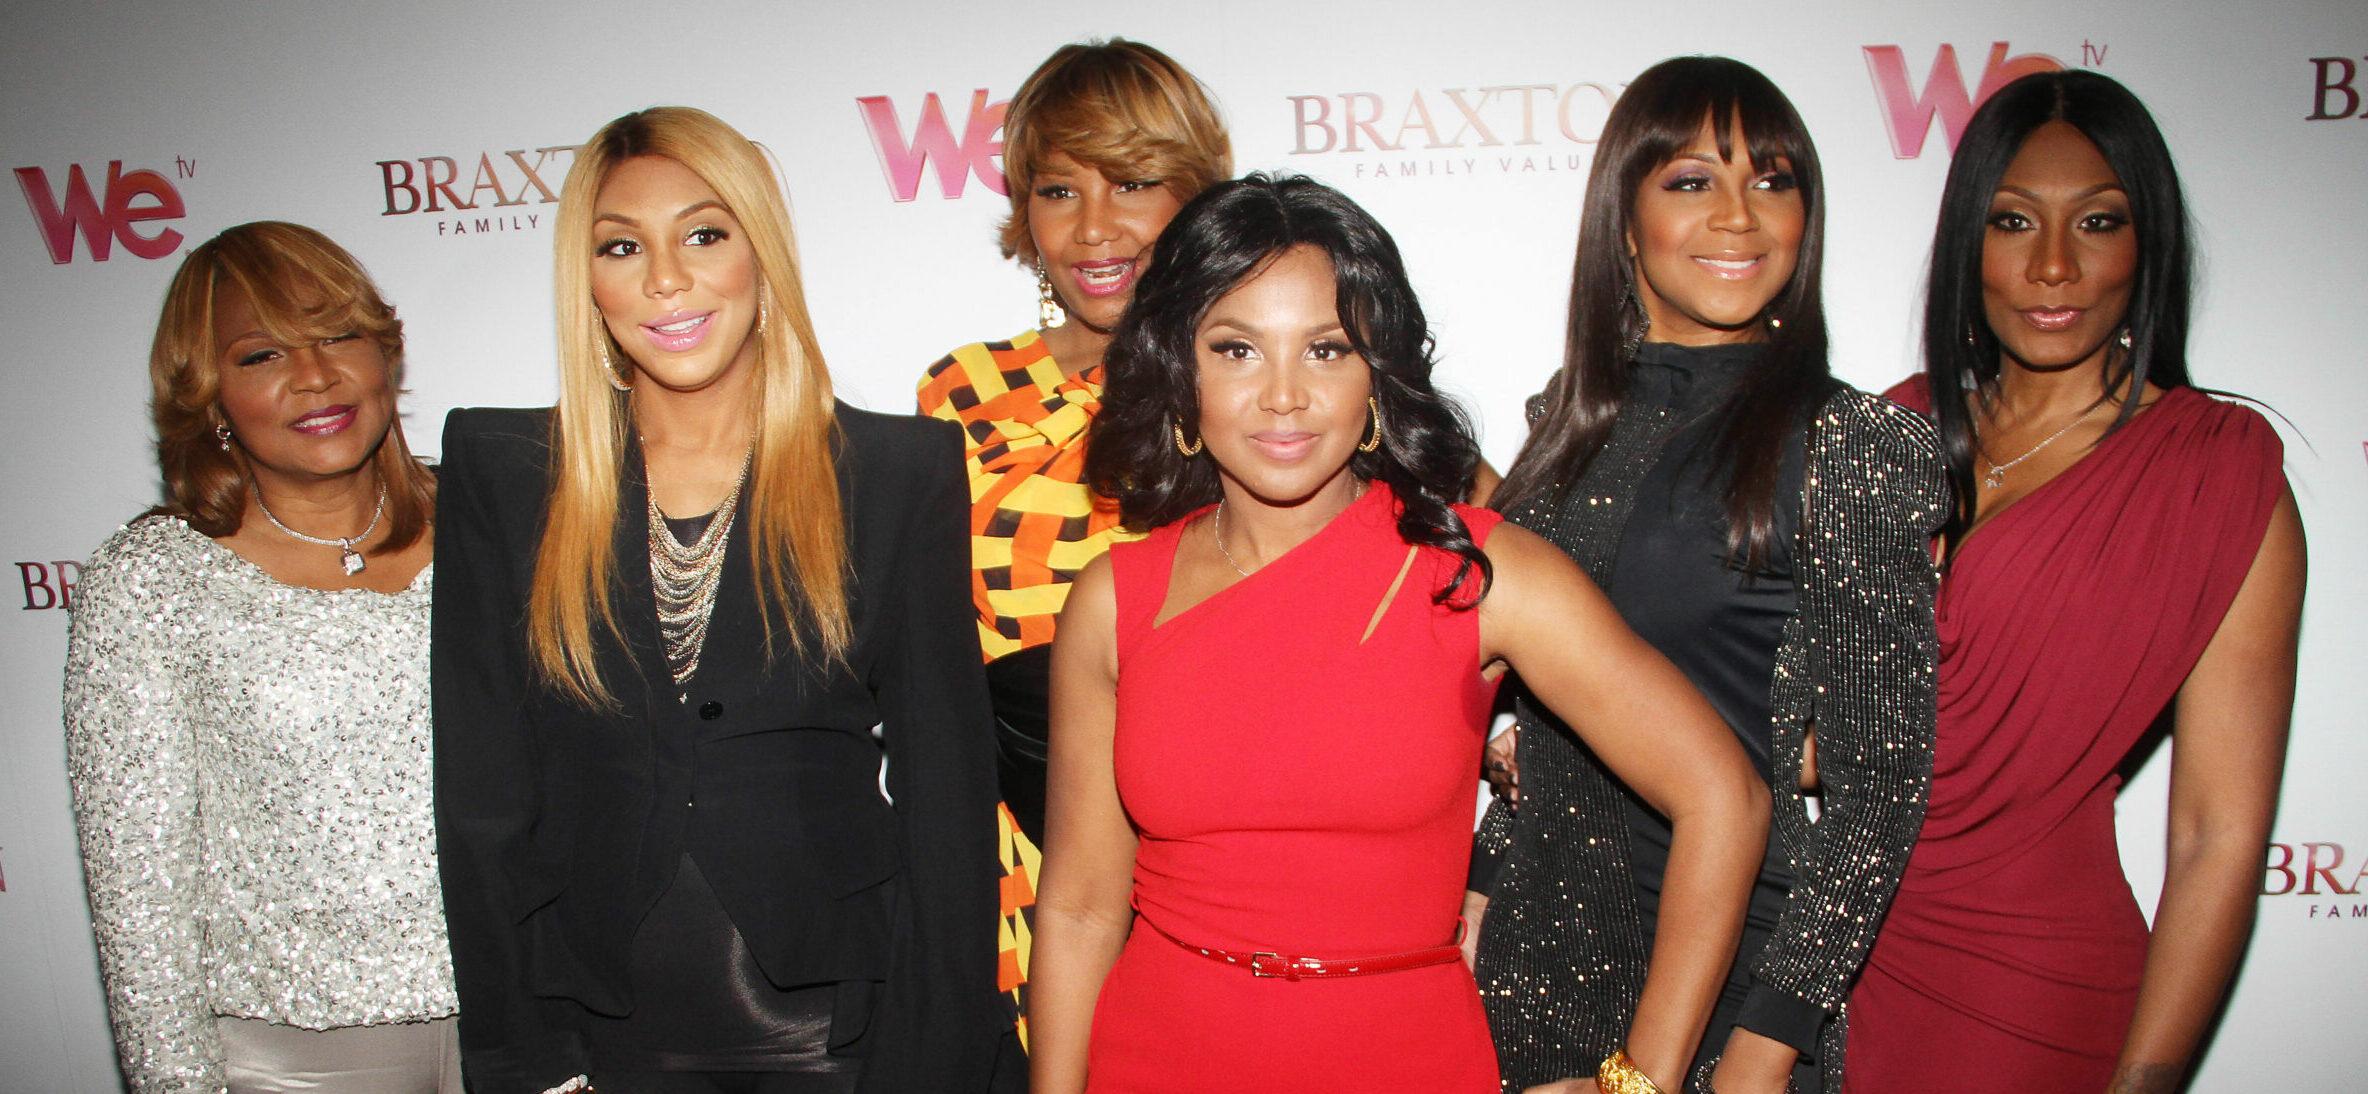 The Braxton family at We TV's premiere of Braxton Family Values at STK